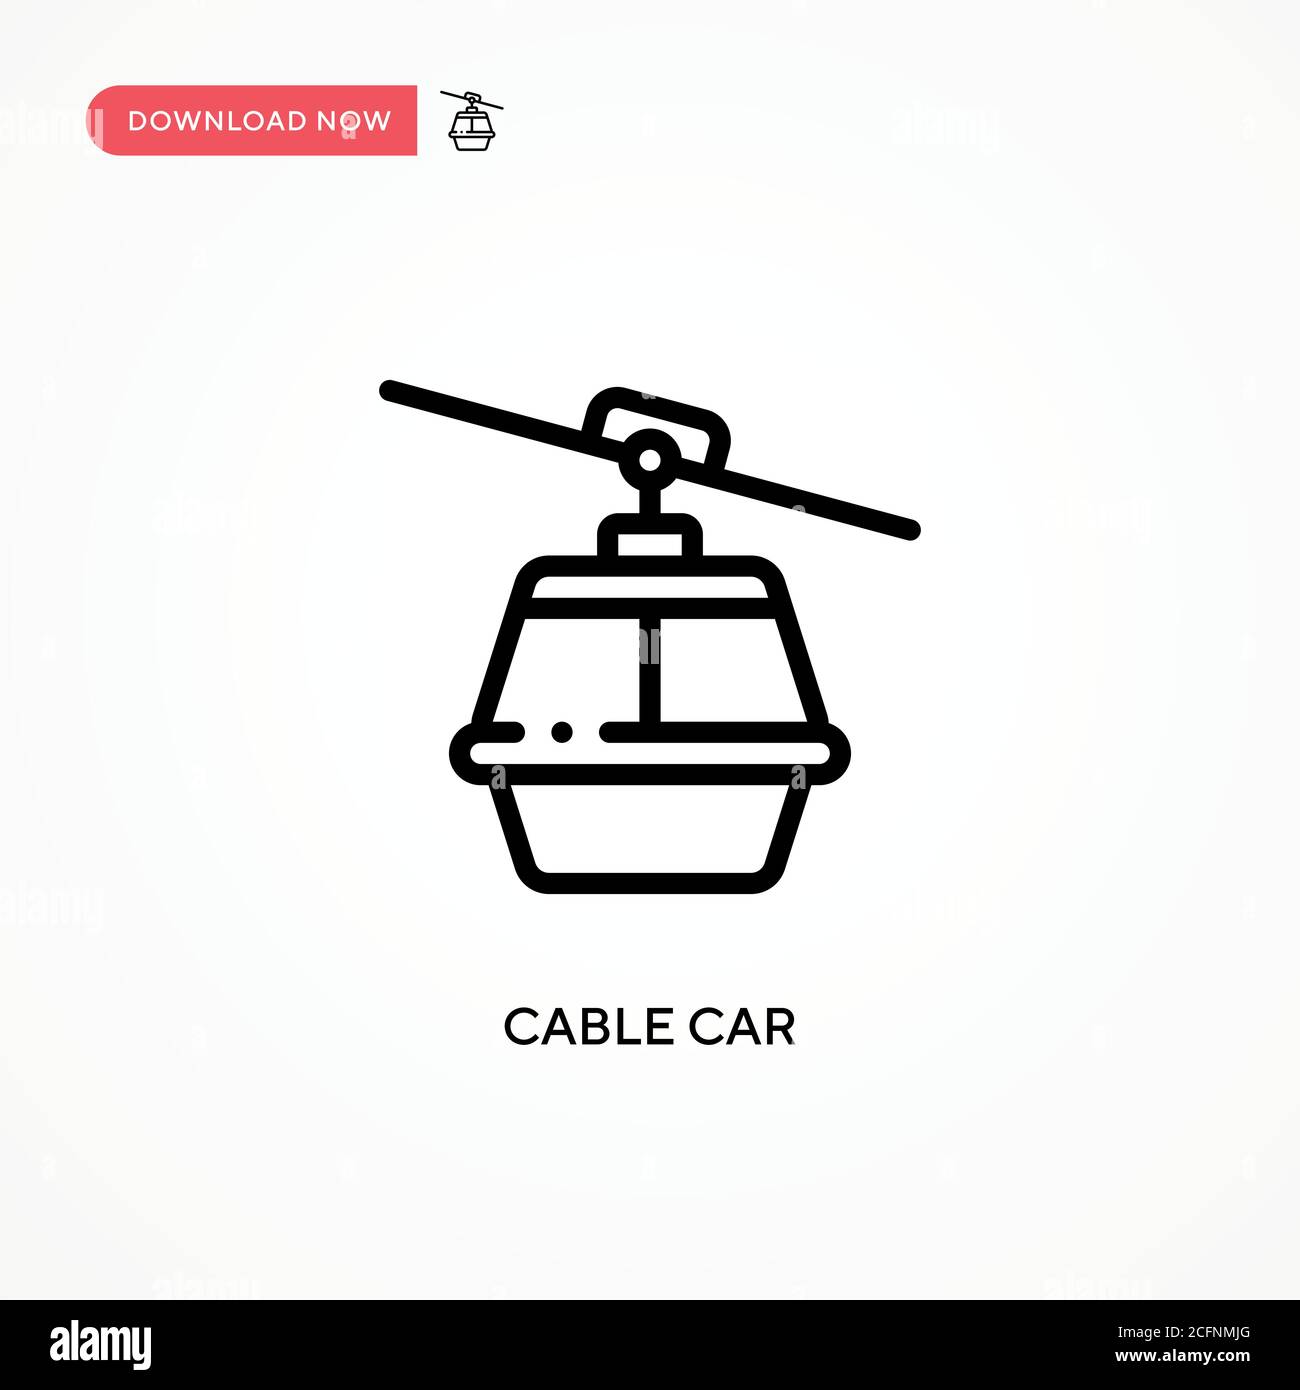 Cable car vector icon. Modern, simple flat vector illustration for web site or mobile app Stock Vector